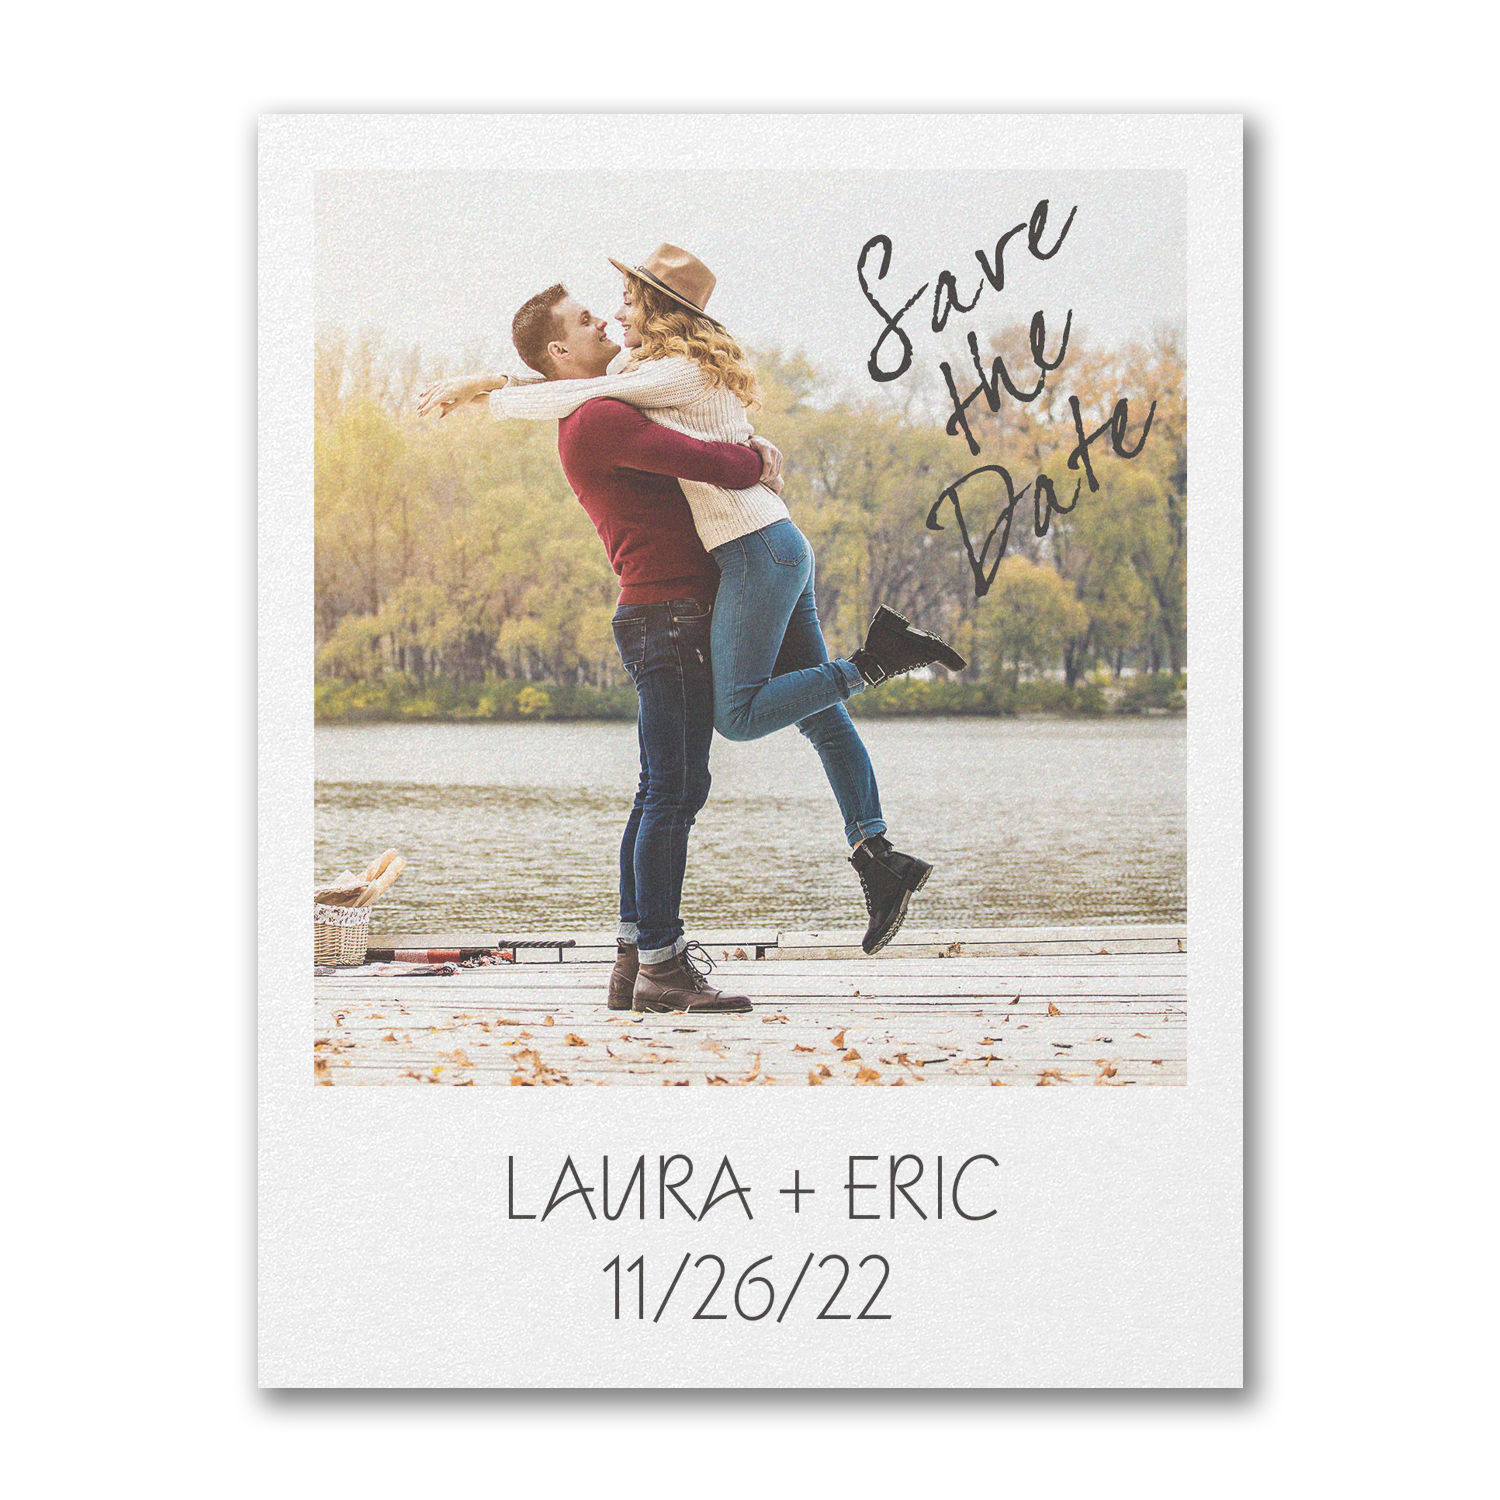 photo save the date postcard